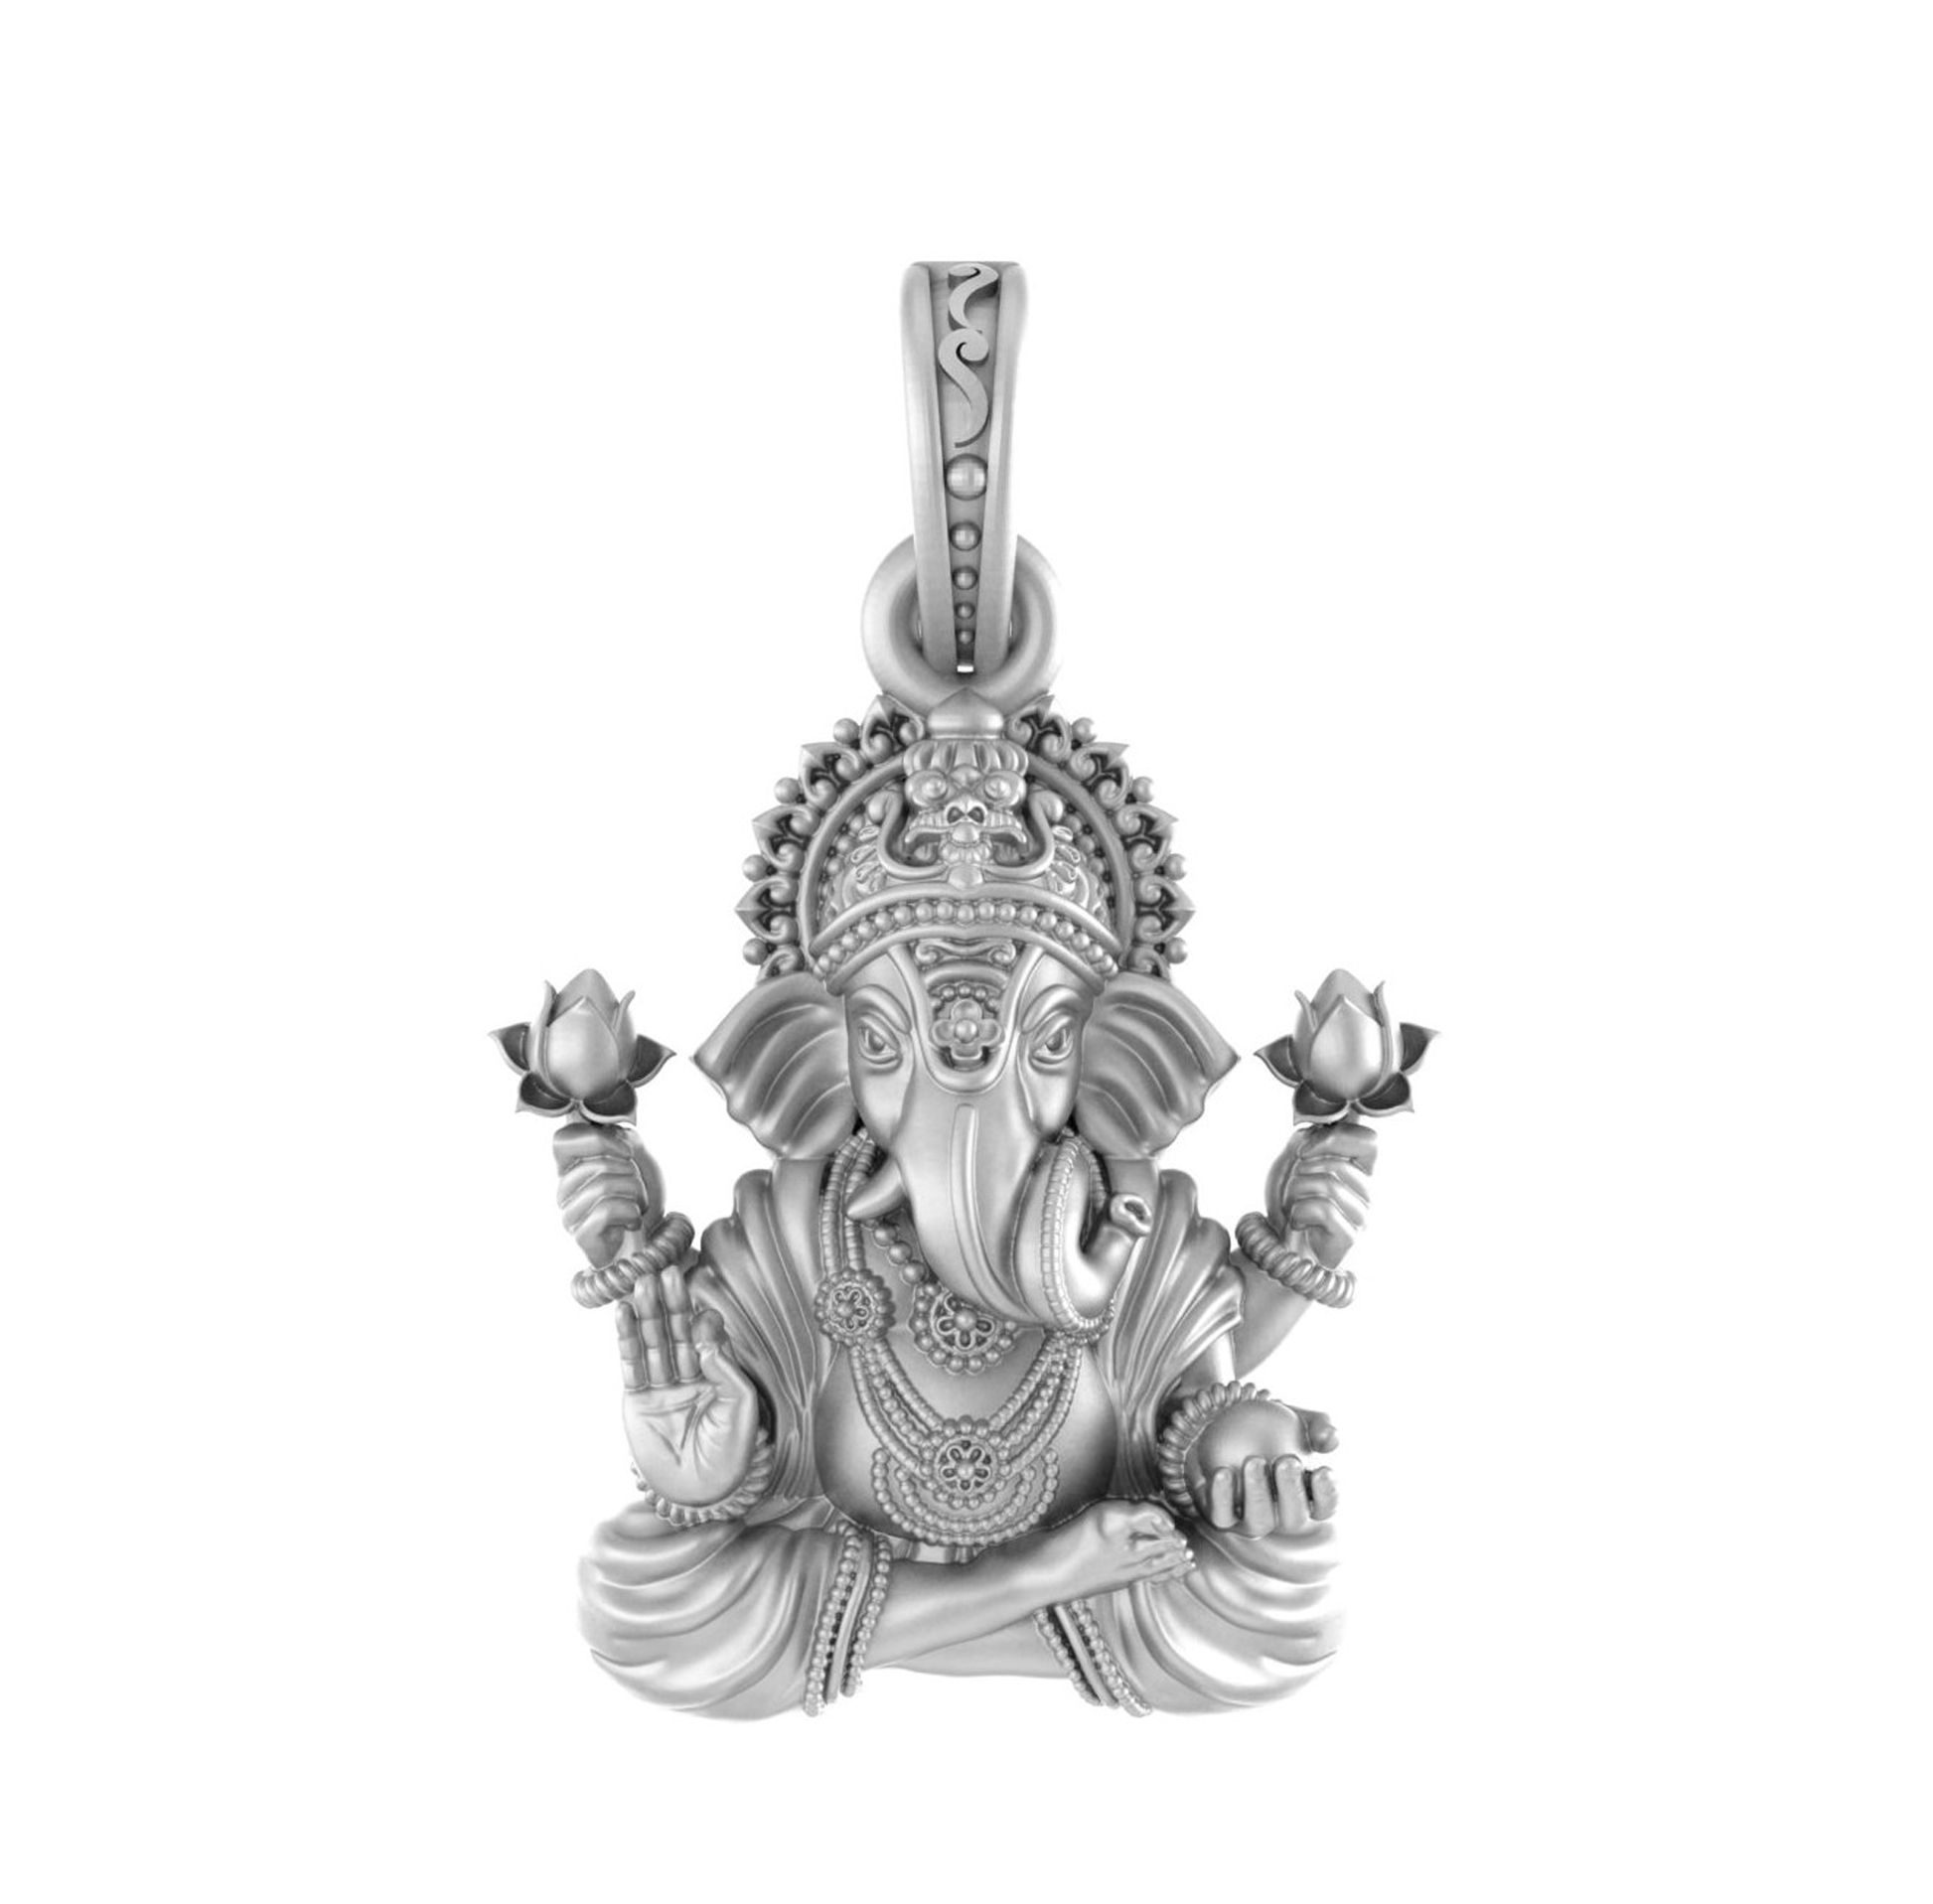 Akshat Sapphire Sterling Silver (92.5% purity) God Ganesh Pendant for Men & Women Pure Silver Lord Ganapathy Locket for Good Health & Wealth Akshat Sapphire